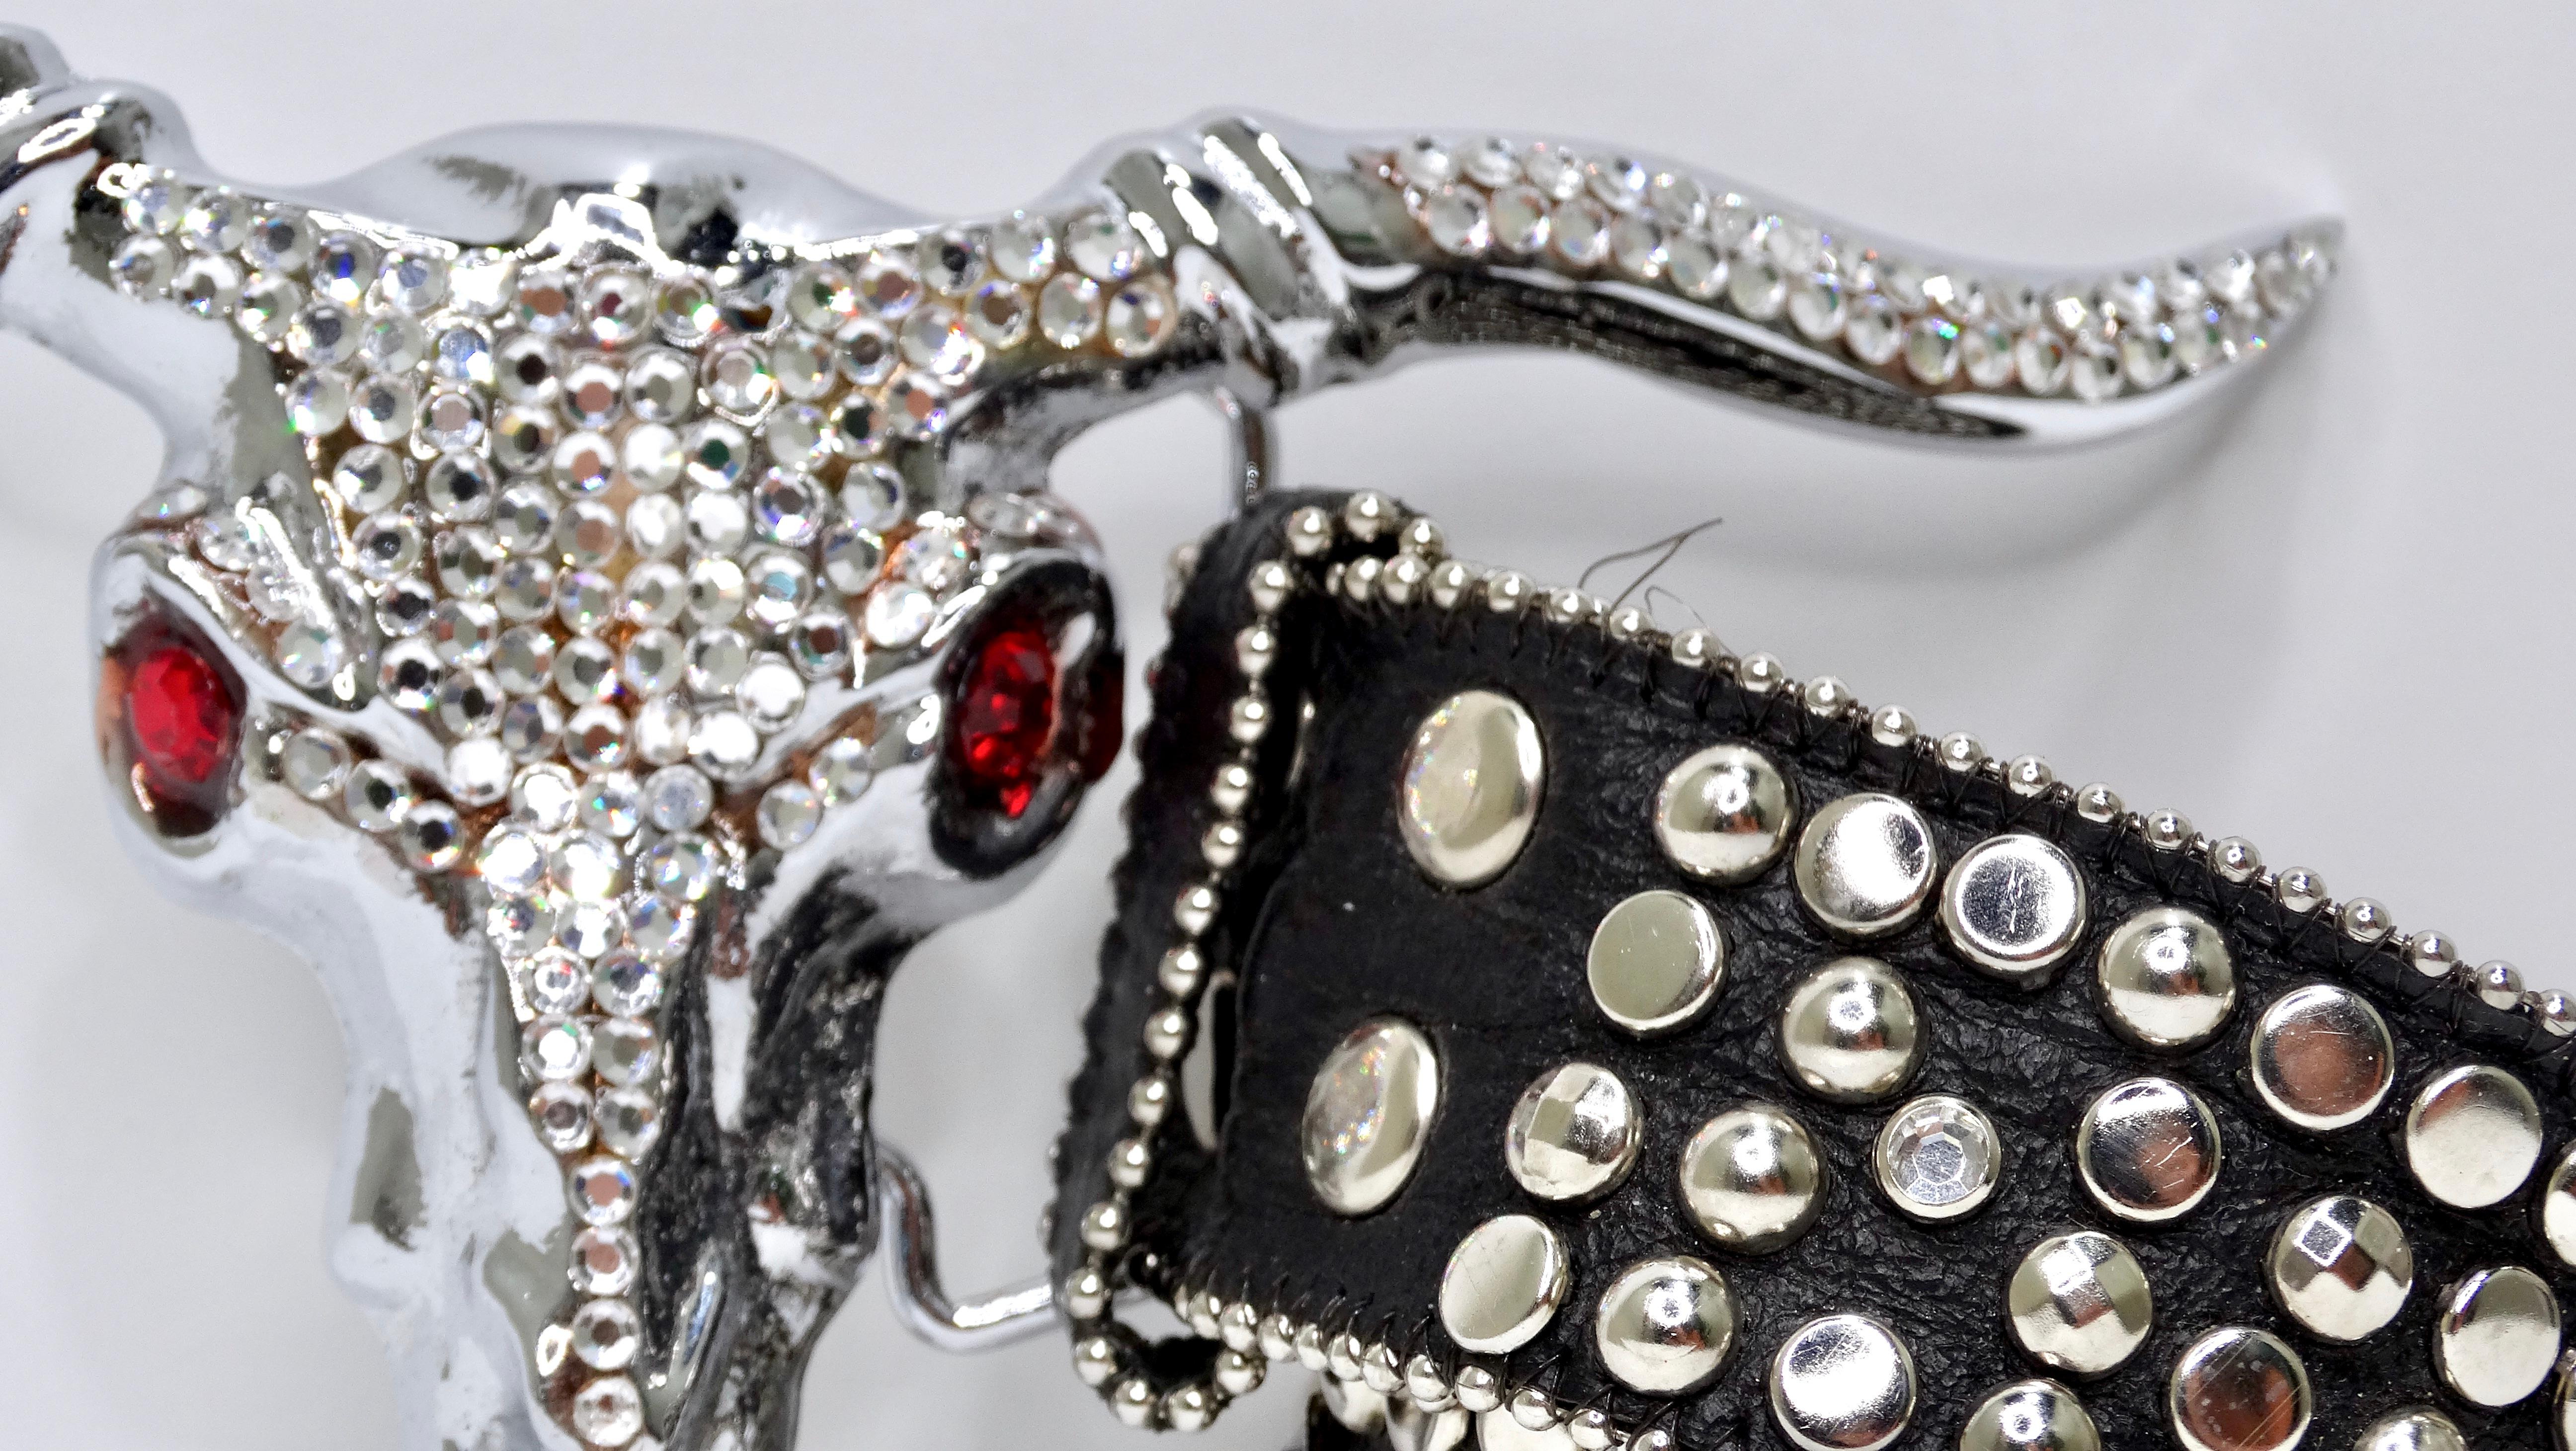 Add some edge to your everyday western belt! This intricately designed belt buckle depicts a longhorn steer skull completely adorned with clear crystals and red crystals for eyes. The belt is highly detailed with silver metal studs lining the entire